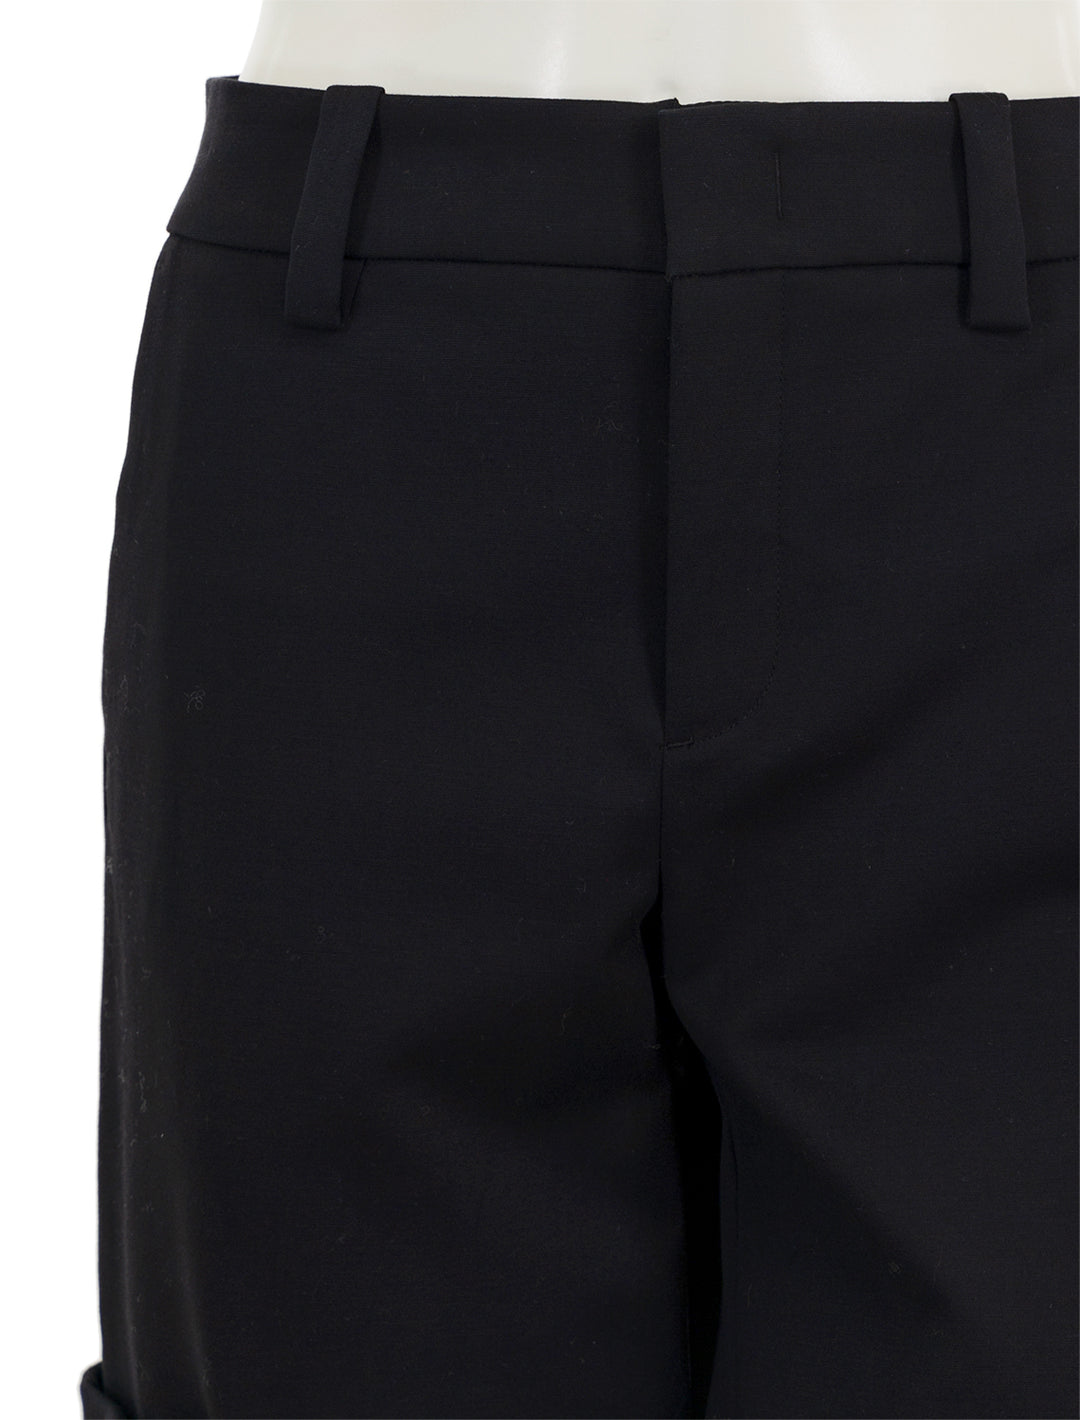 Close-up view of Vince's utility crop pant in black.